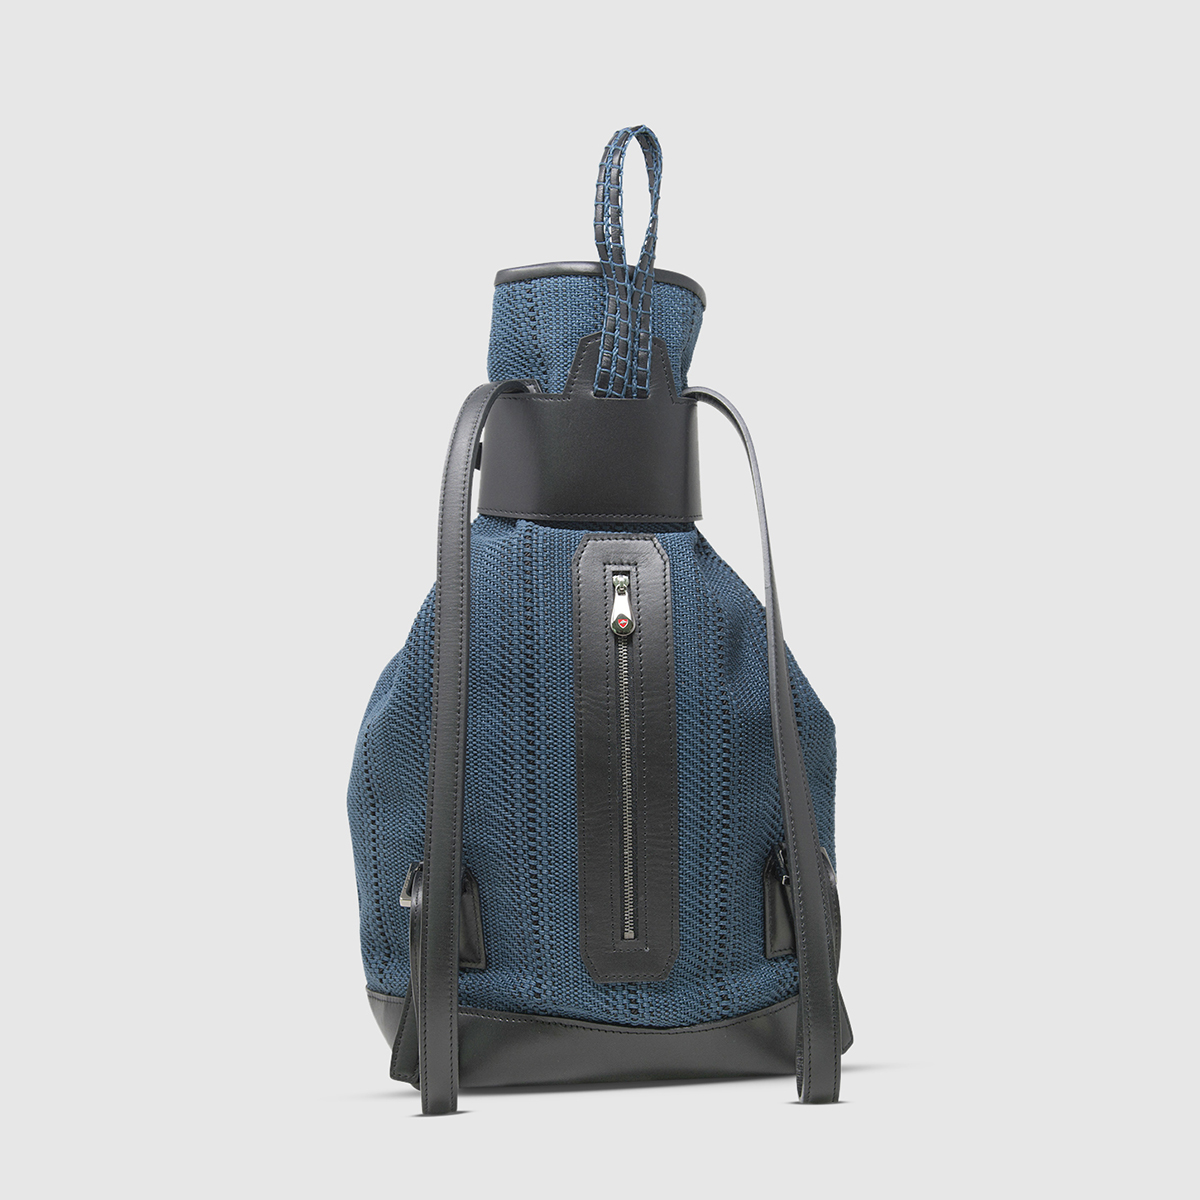 Athison Black/Jeans Alight Backpack Athison on sale 2022 2